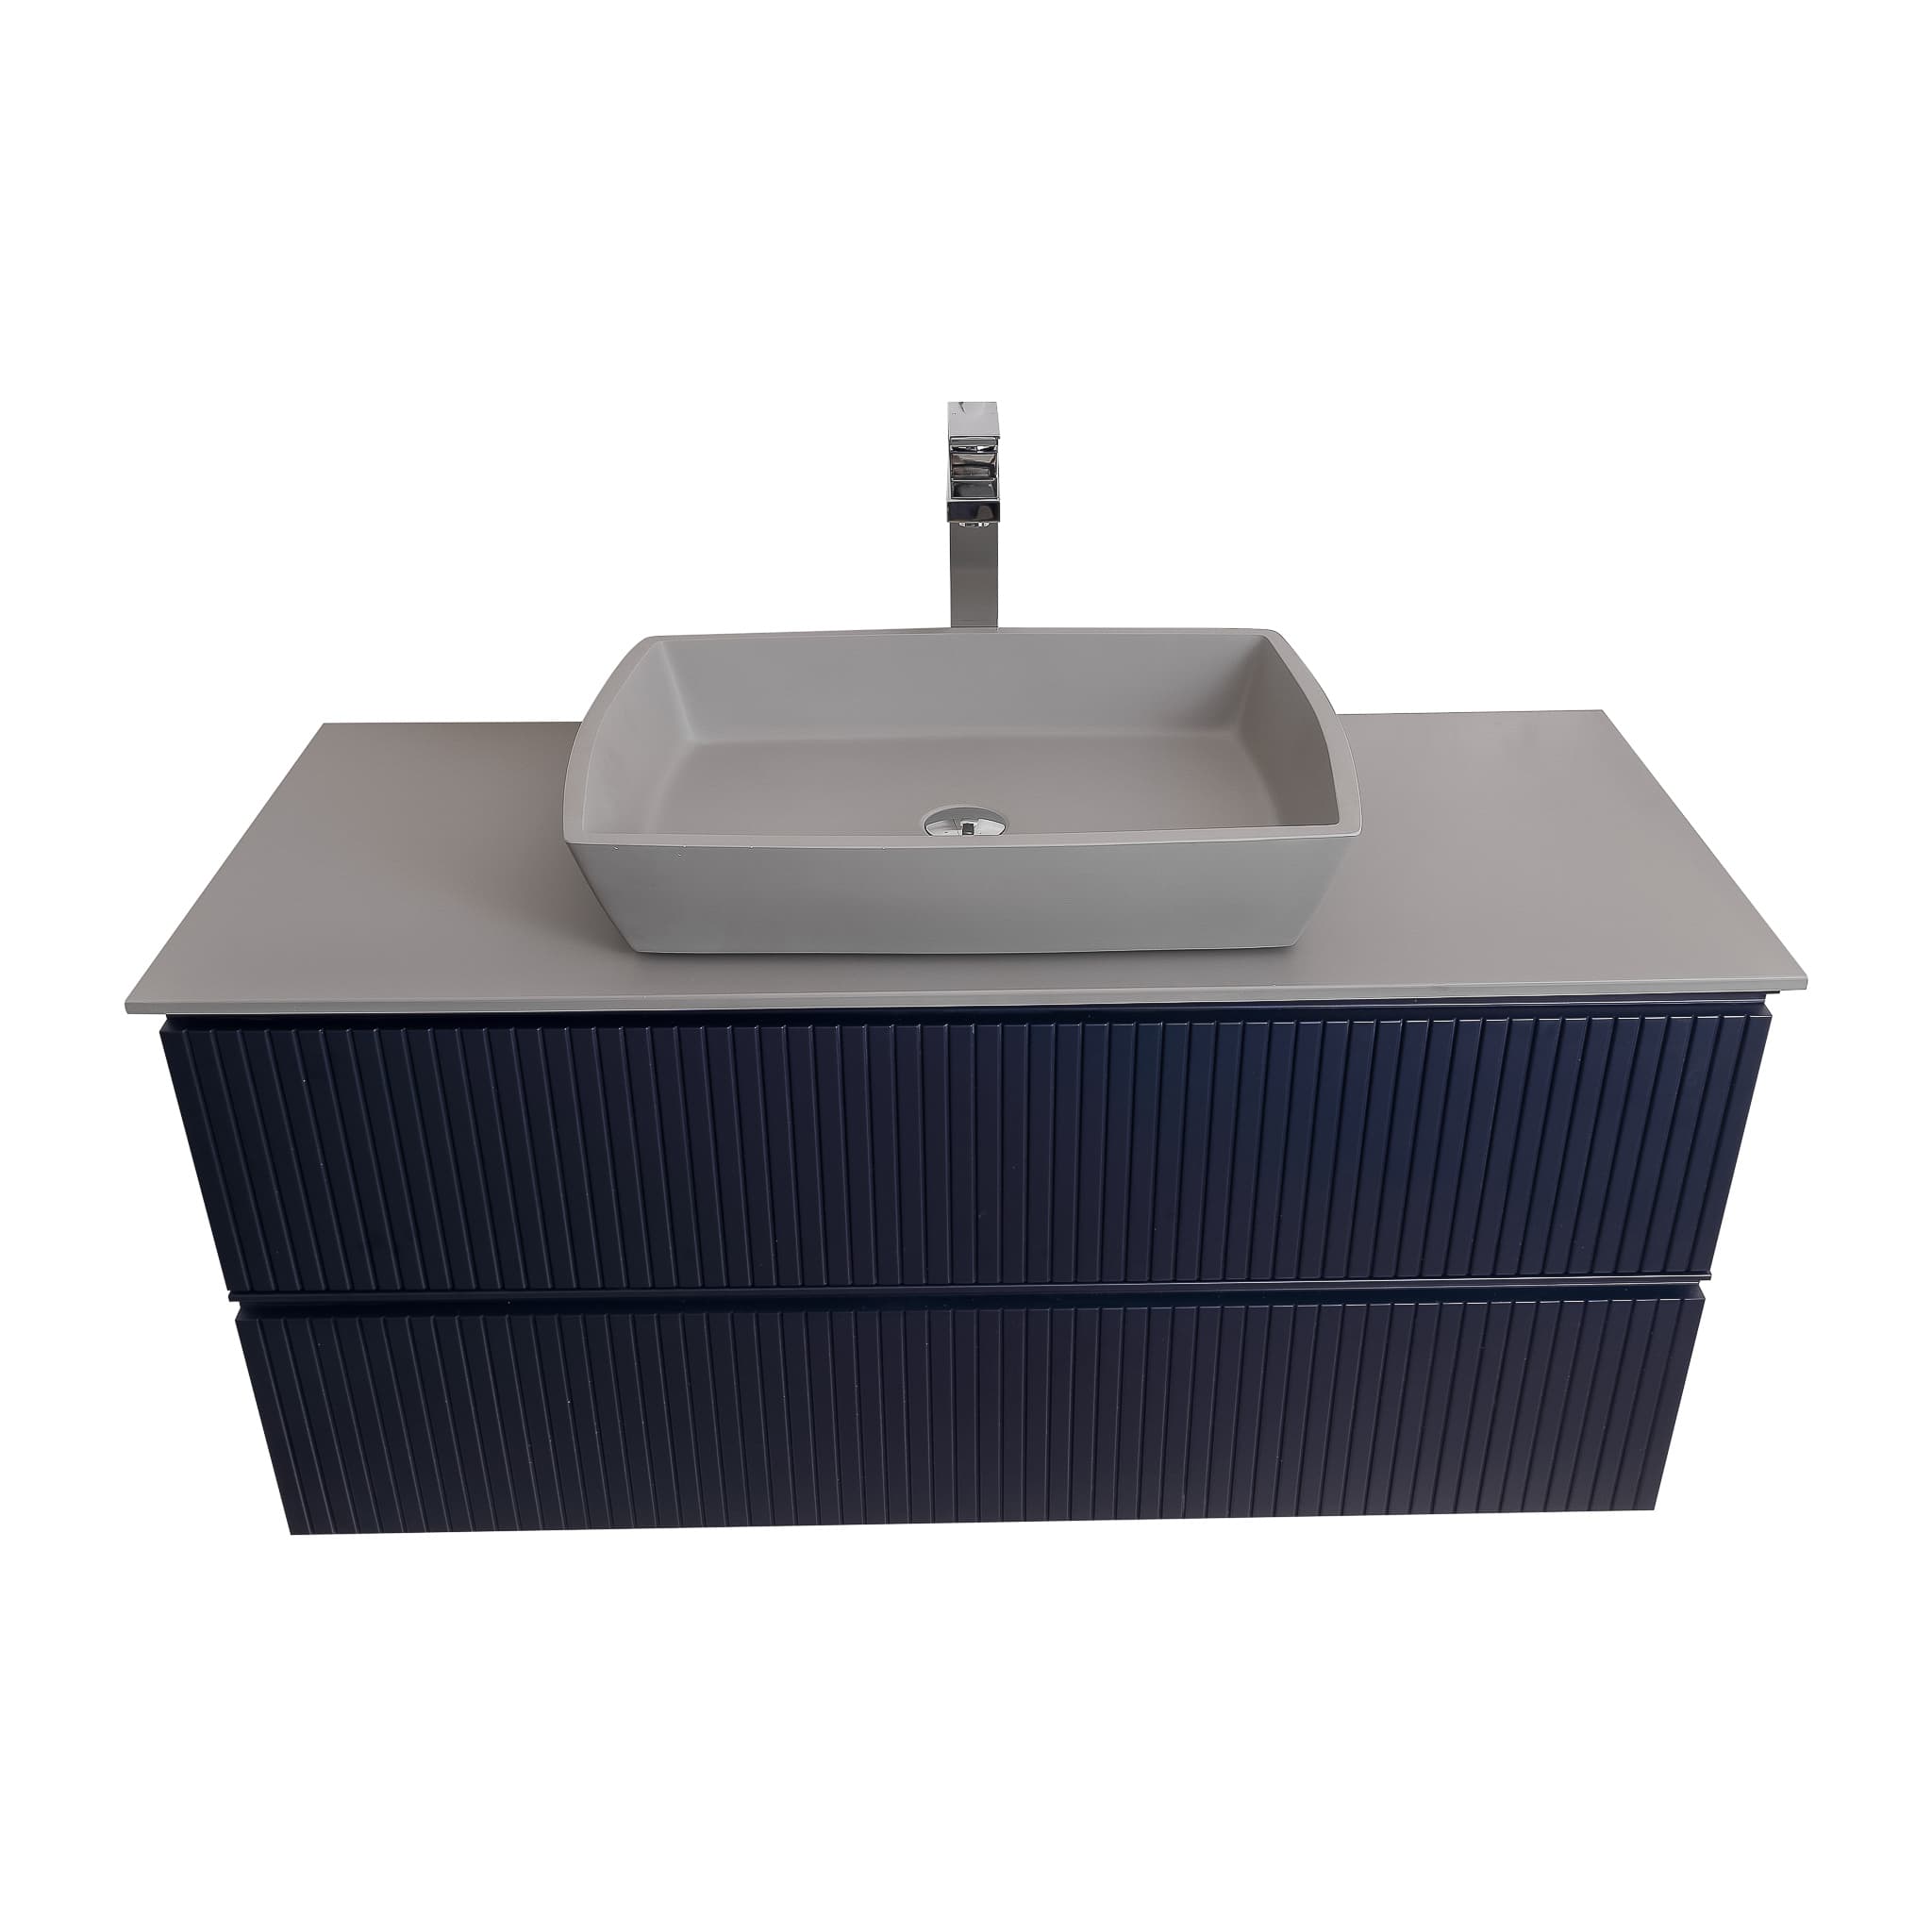 Ares 47.5 Matte Navy Blue Cabinet, Solid Surface Flat Grey Counter And Square Solid Surface Grey Basin 1316, Wall Mounted Modern Vanity Set